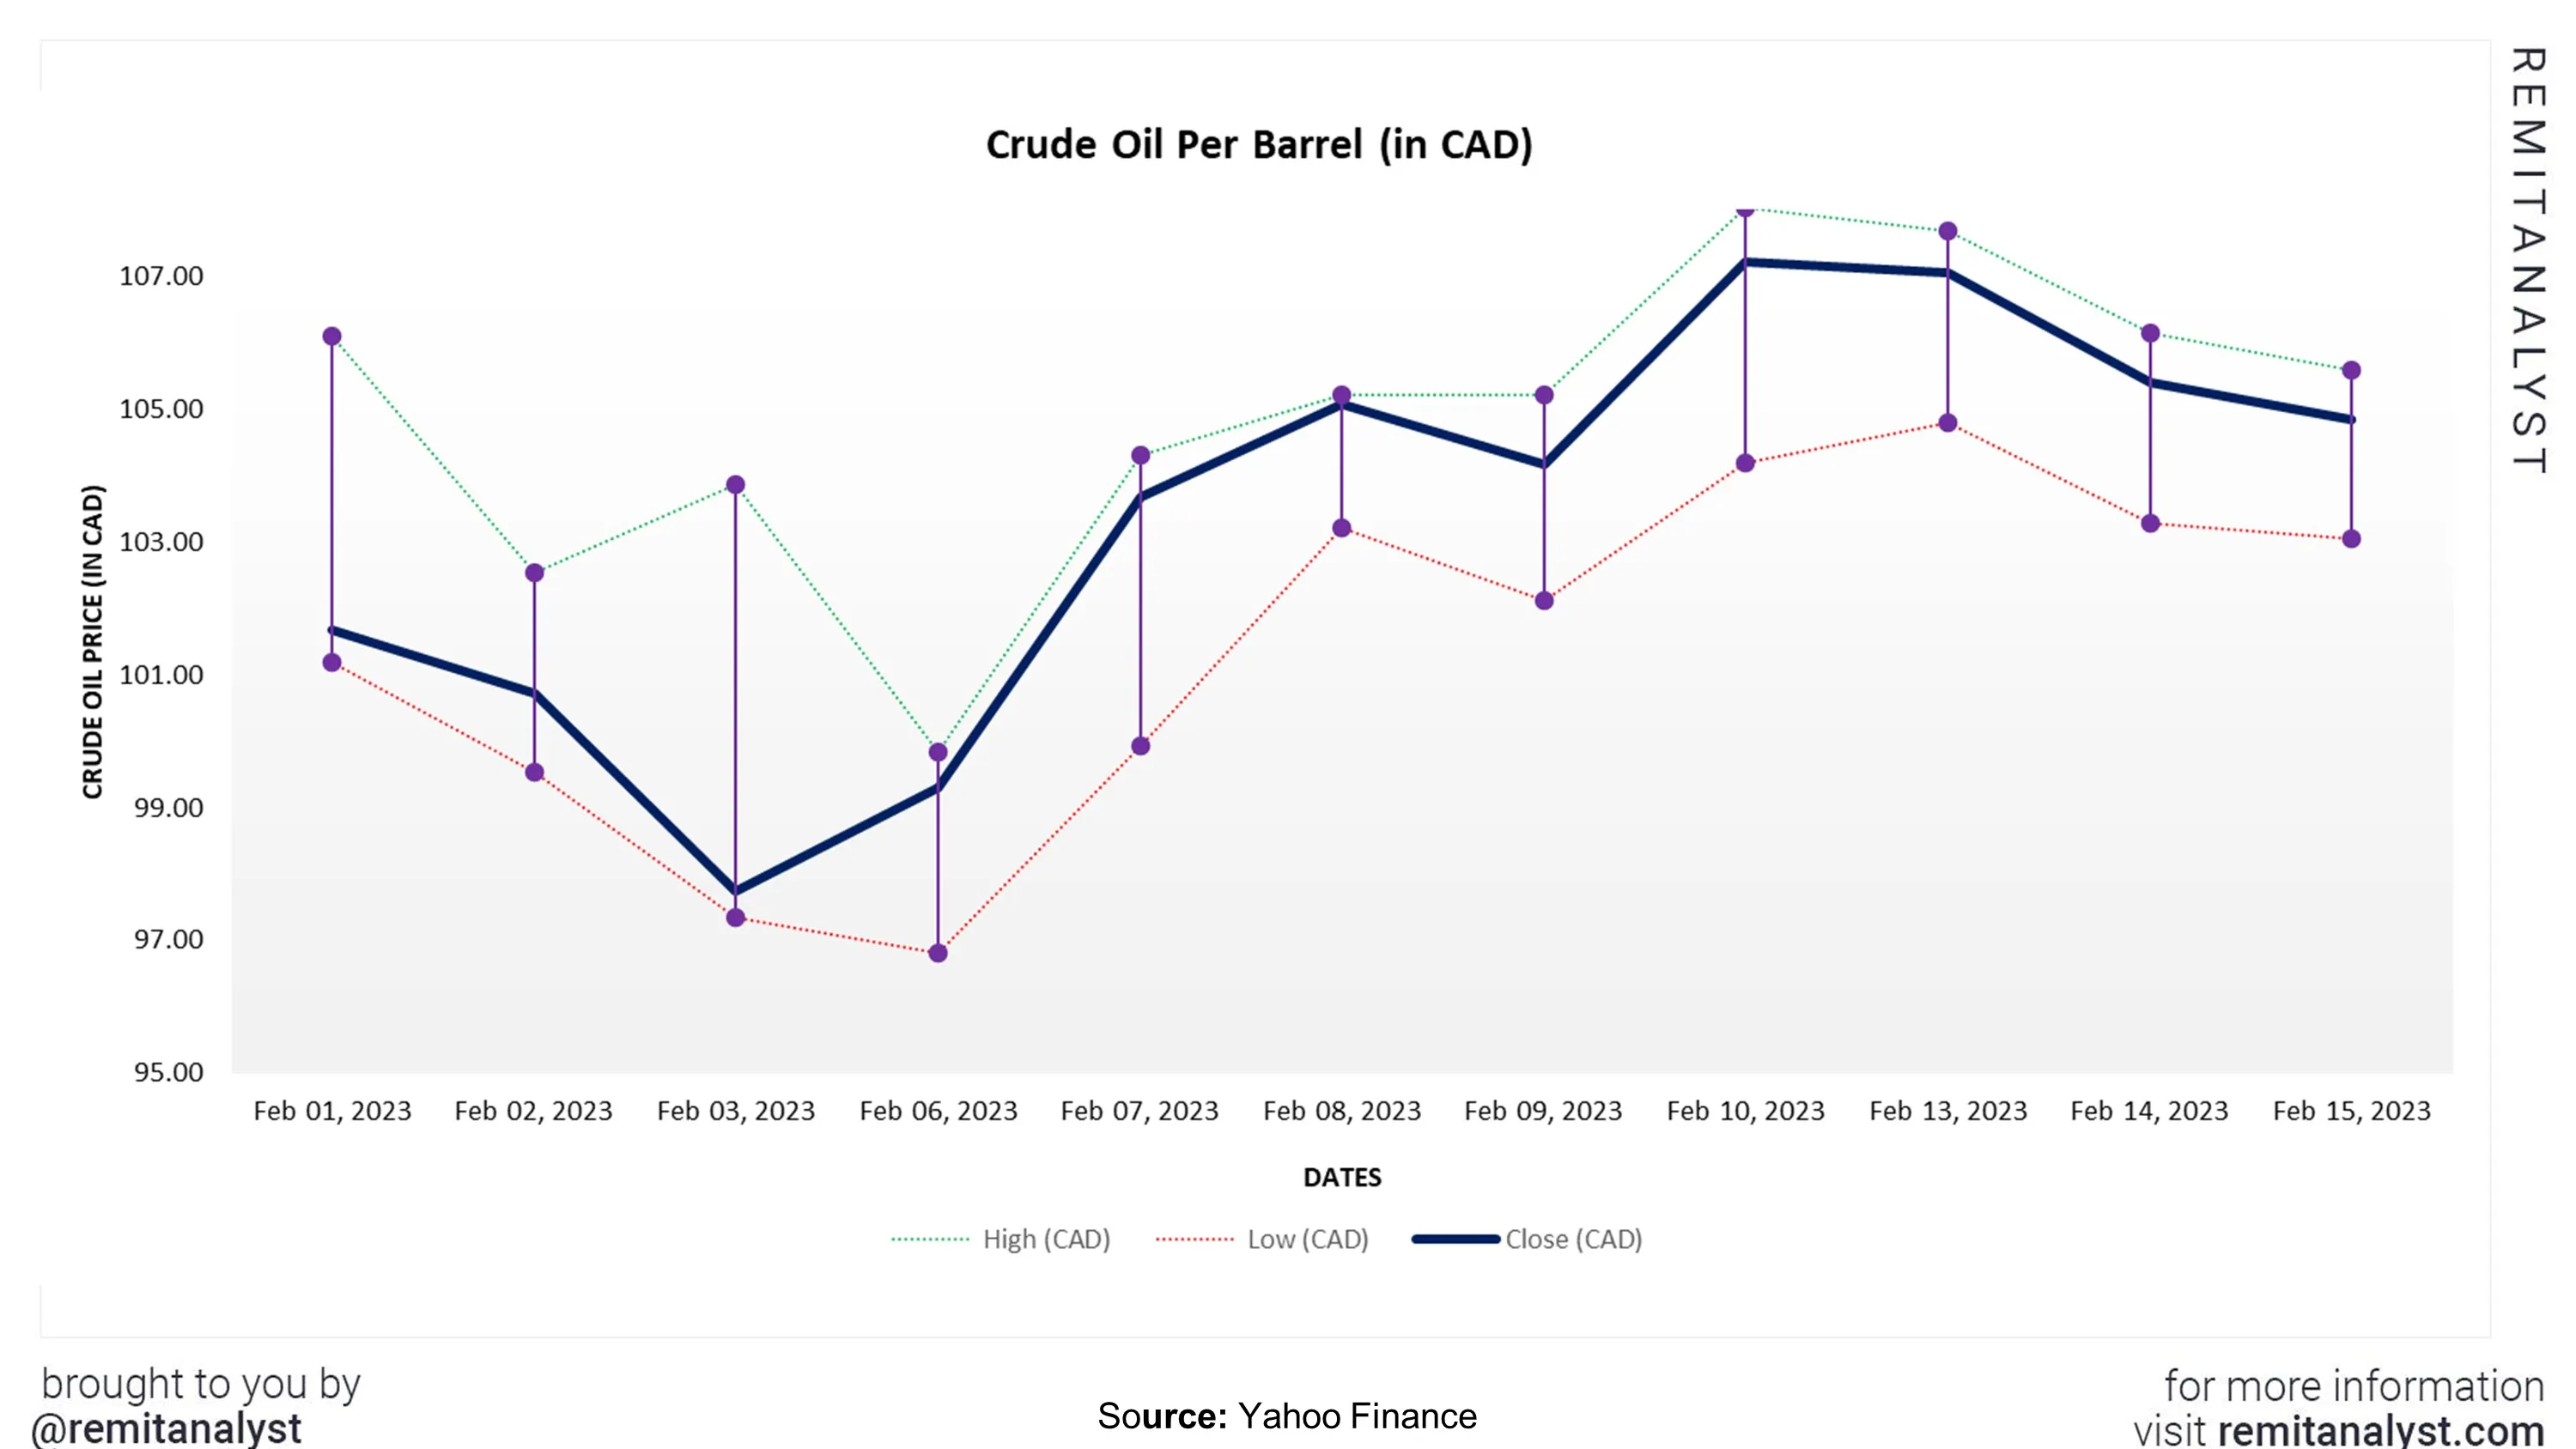 crude-oil-prices-canada-from-1-feb-2023-to-15-feb-2023